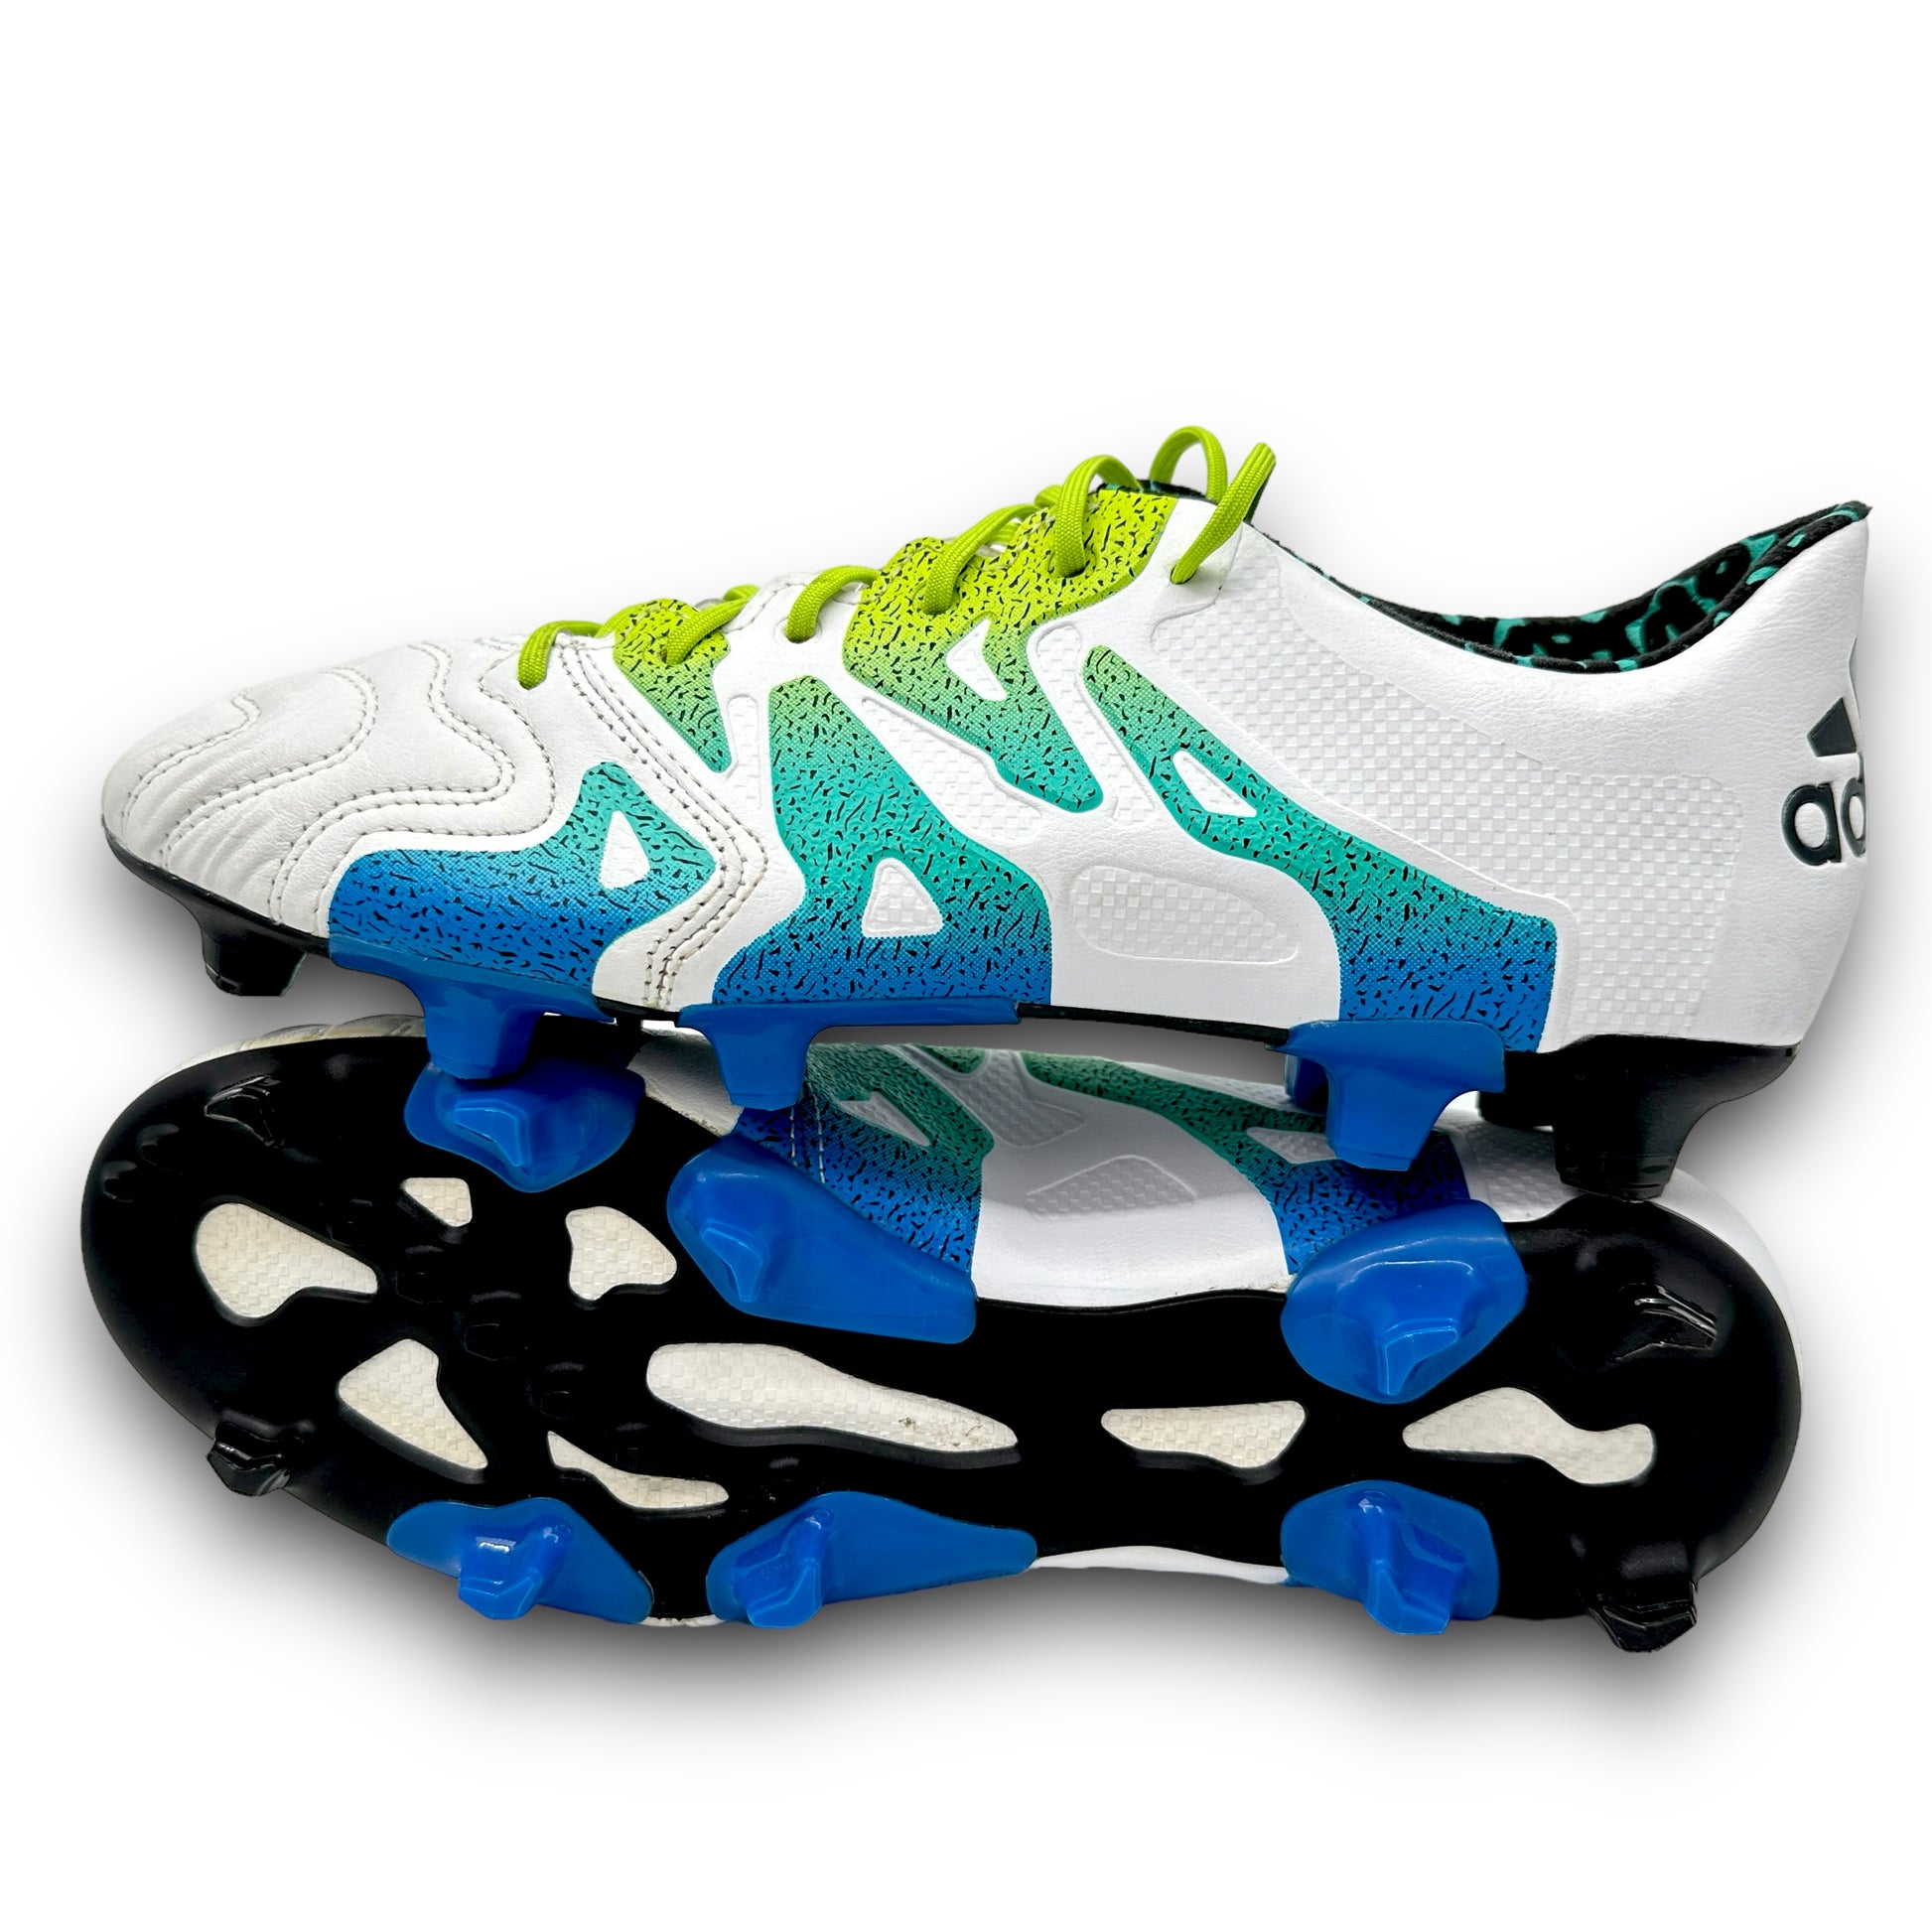 Adidas X 15.1 FG Athlete service in Germany – shoptcrampons